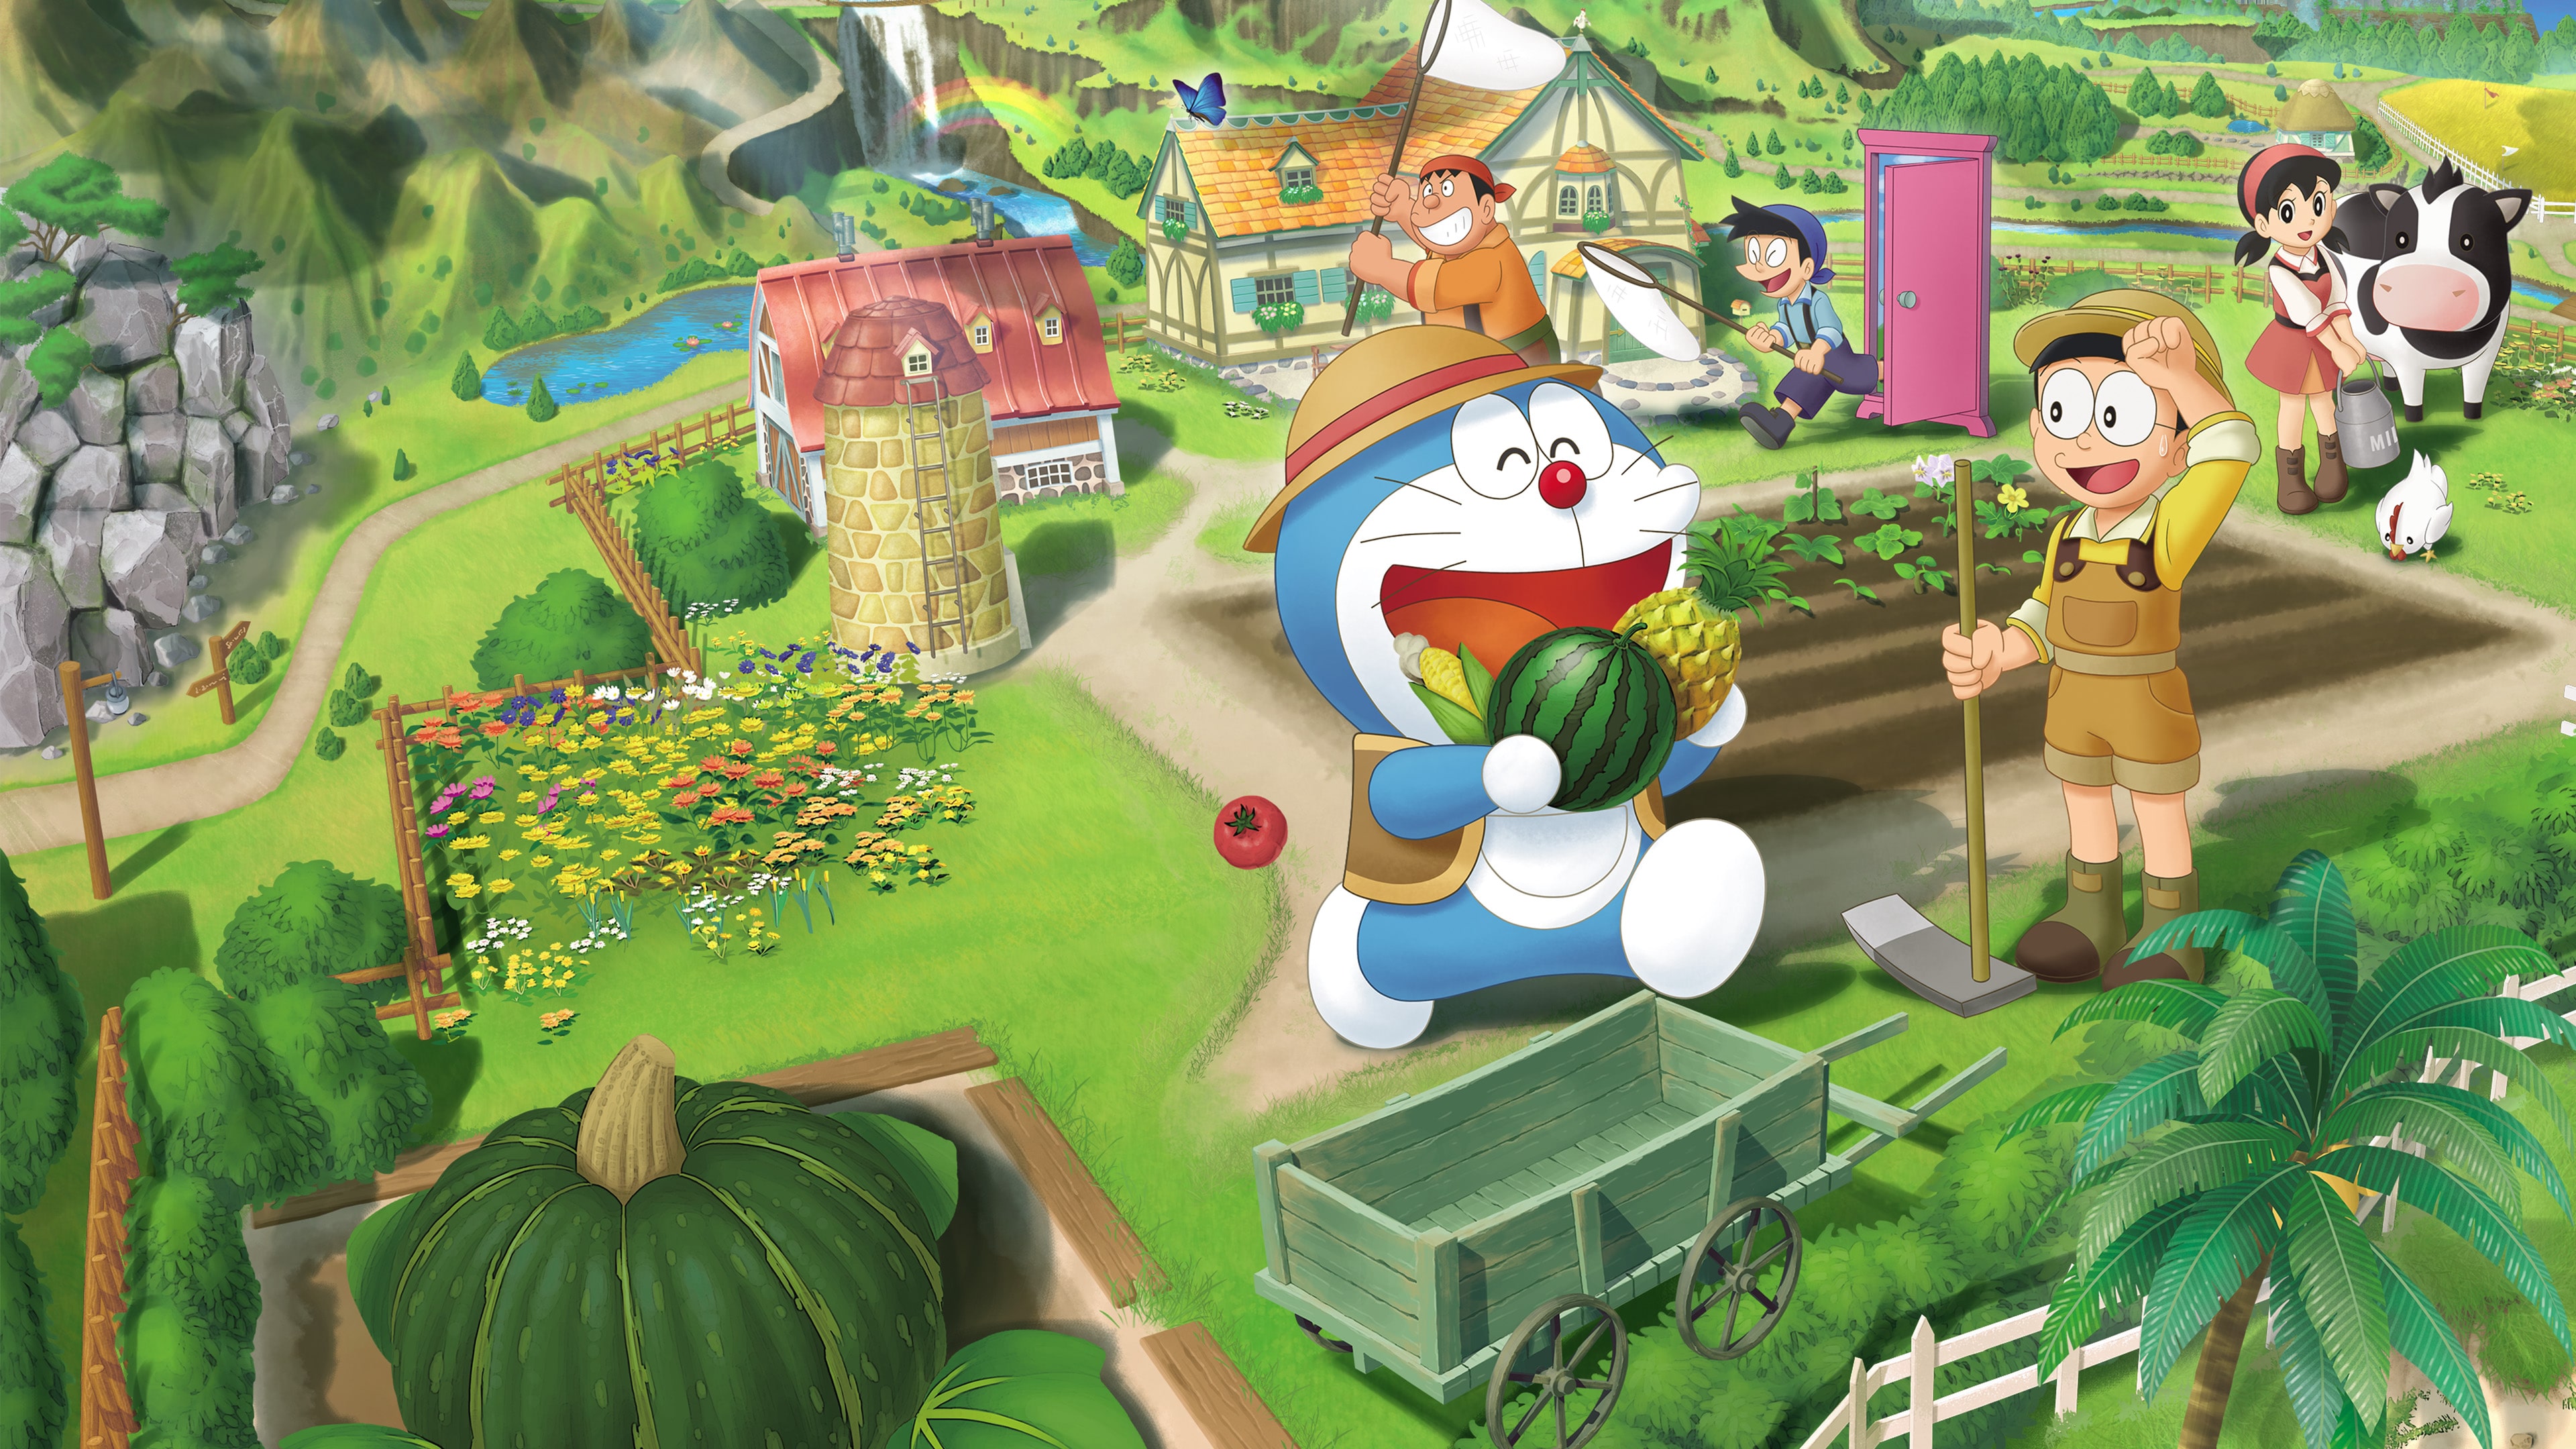 DORAEMON STORY OF SEASONS: Friends of the Great Kingdom Special Edition